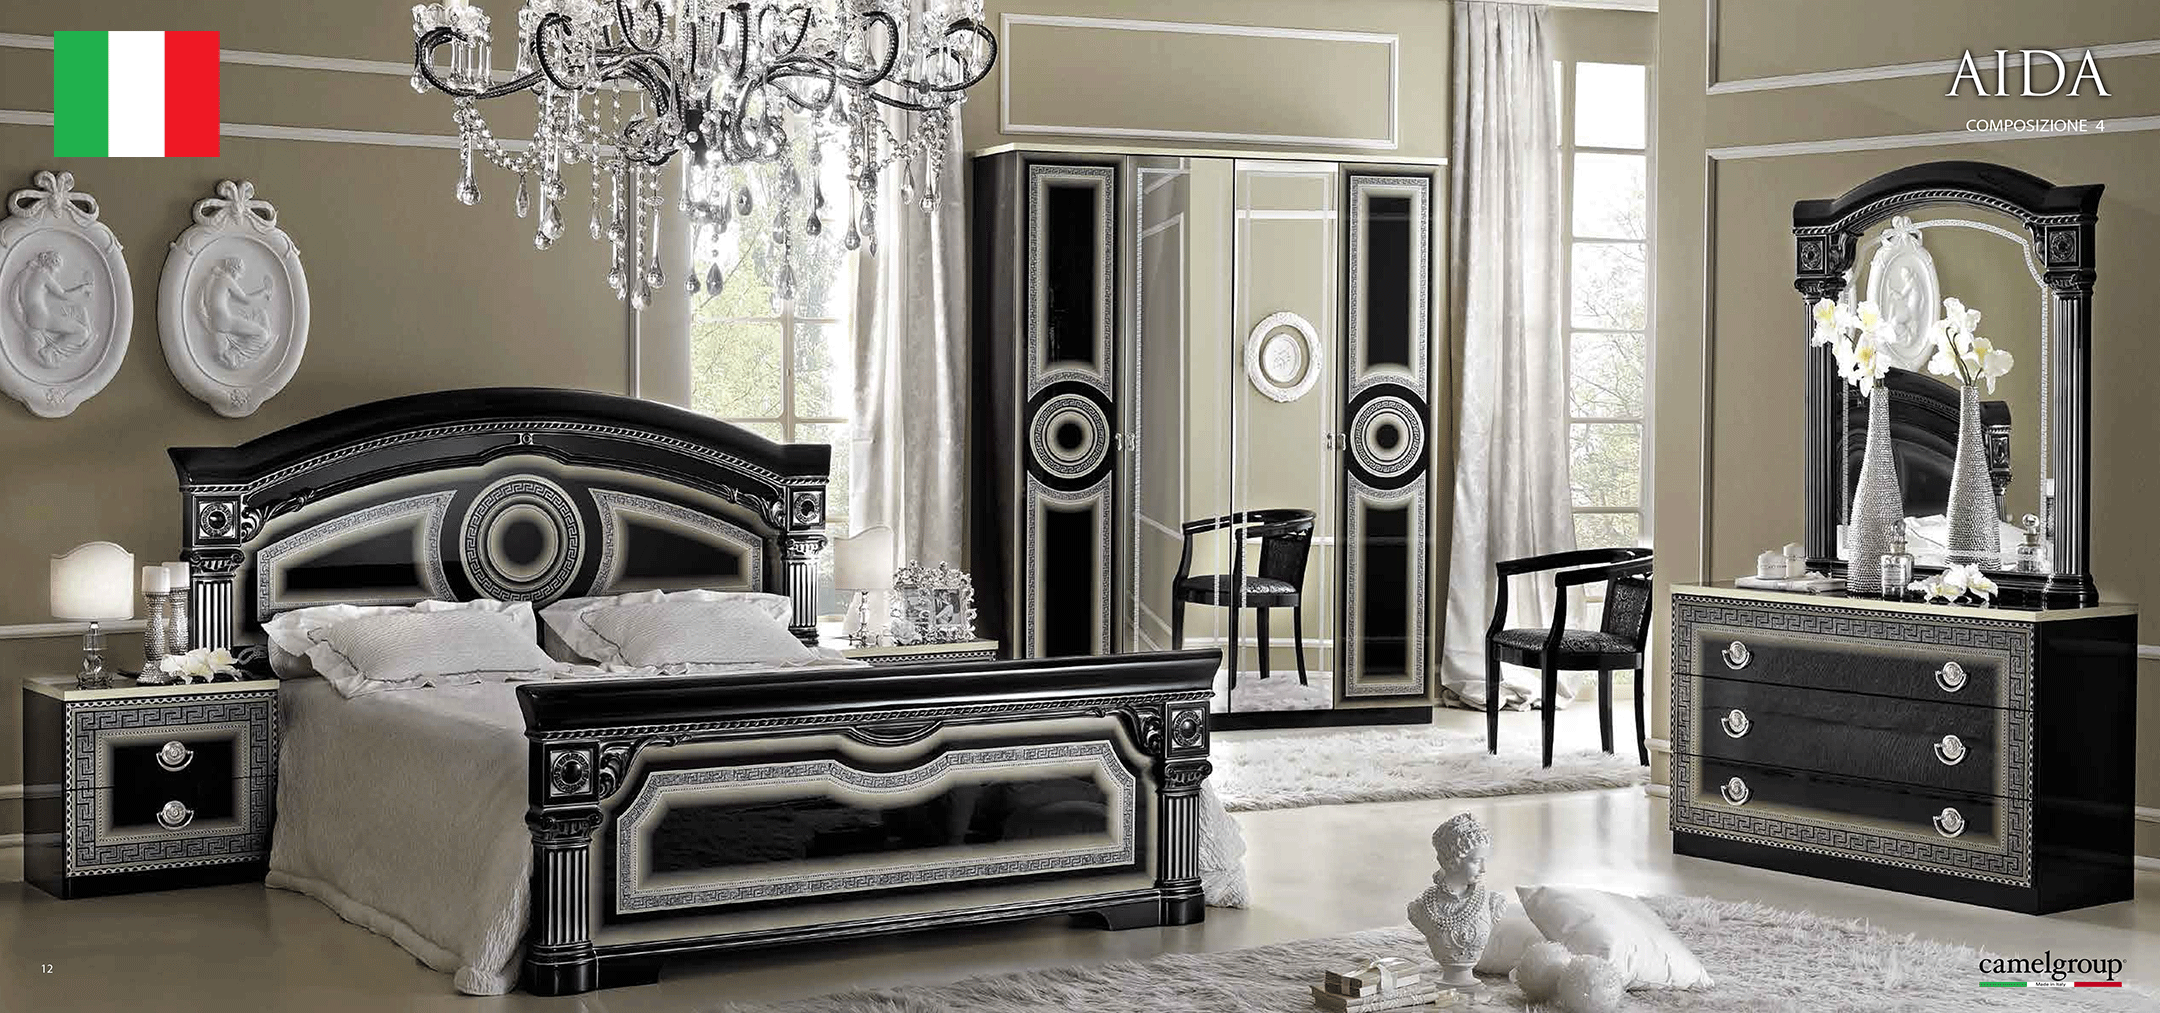 Brands Camel Classic Collection, Italy Aida Bedroom Black/Silver, Camelgroup Italy